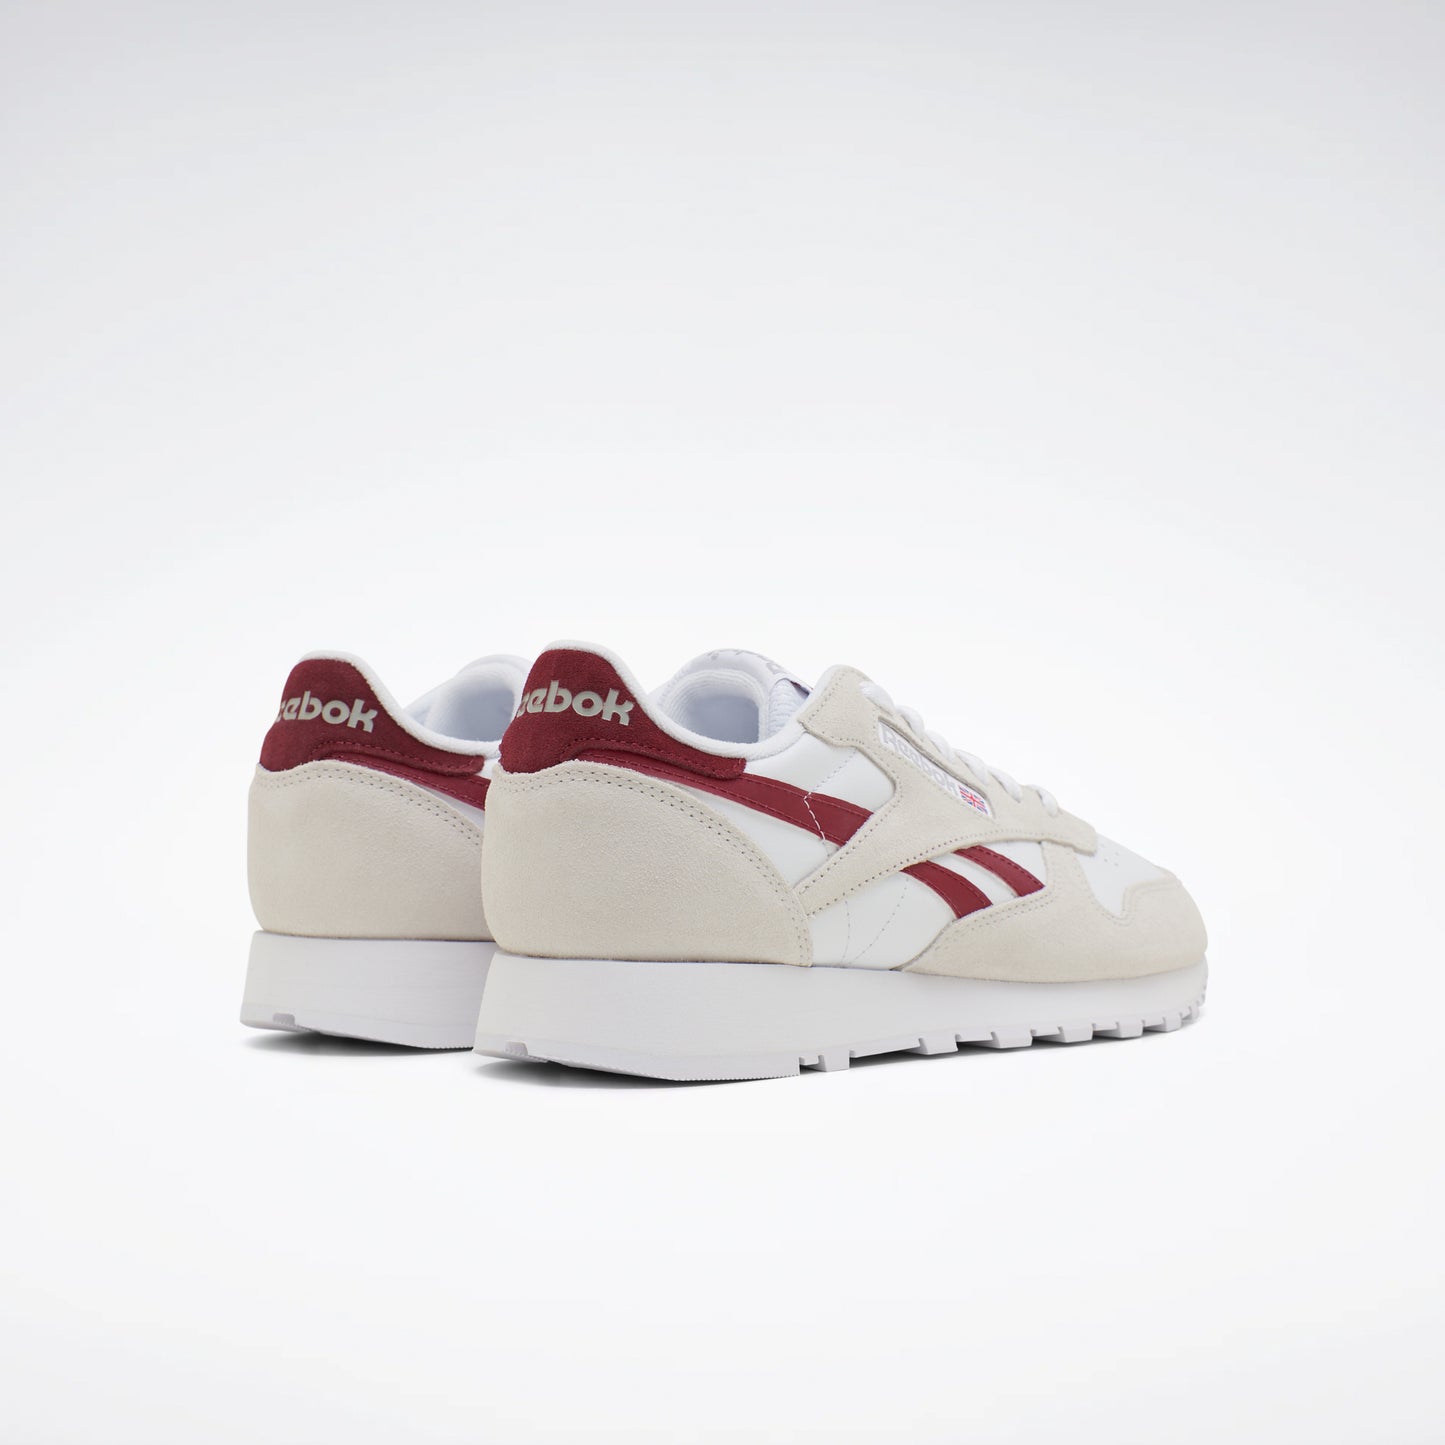 Classic Leather Shoes Pure Grey 1/Burgundy/White